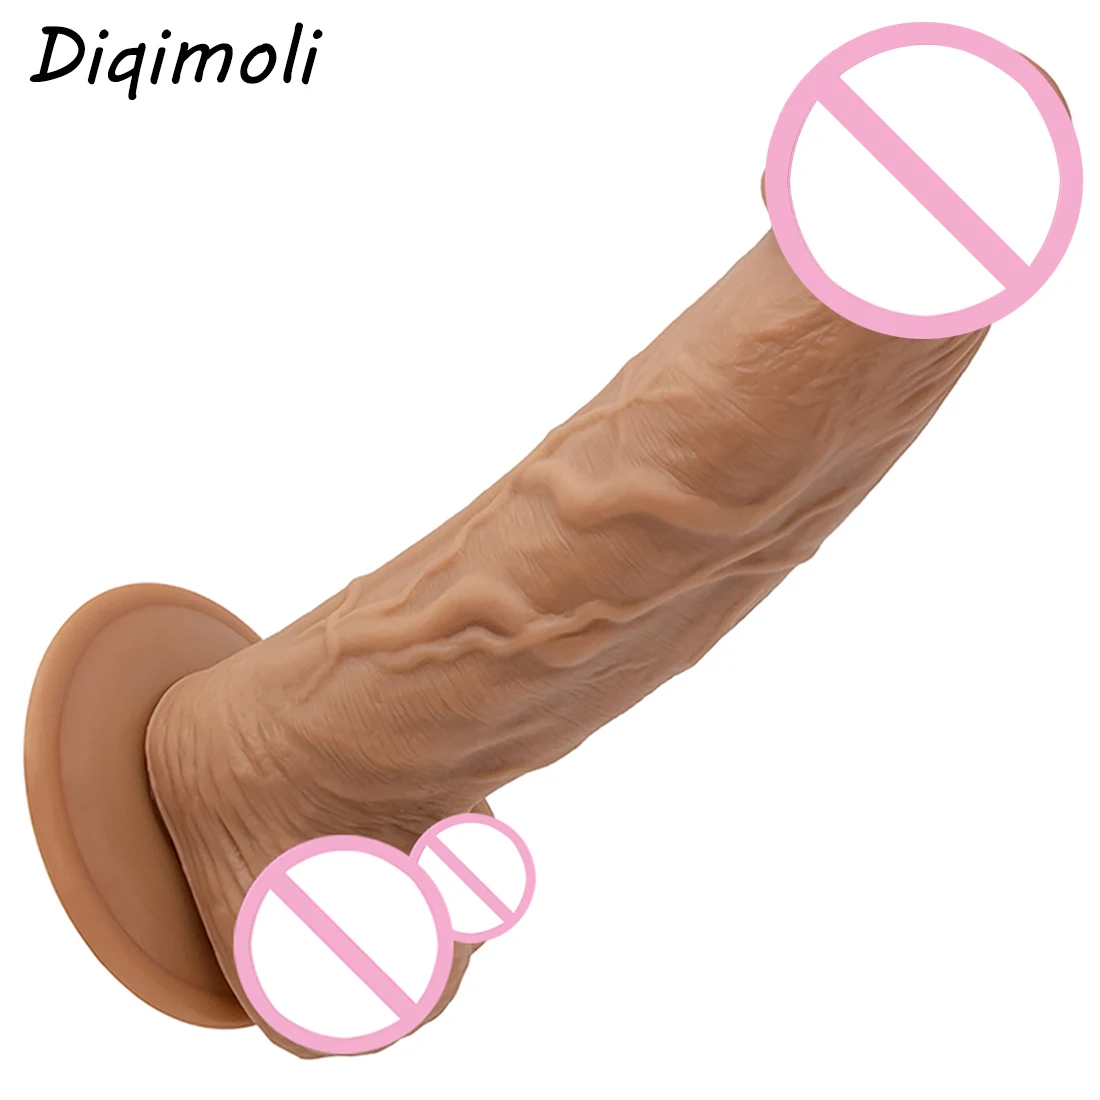 

Huge Realistic Dildos Soft Skin Feeling Phallus Anal Plug Safe Penis Big Dick with Suction Cup Sex Toys for Women Masturbation